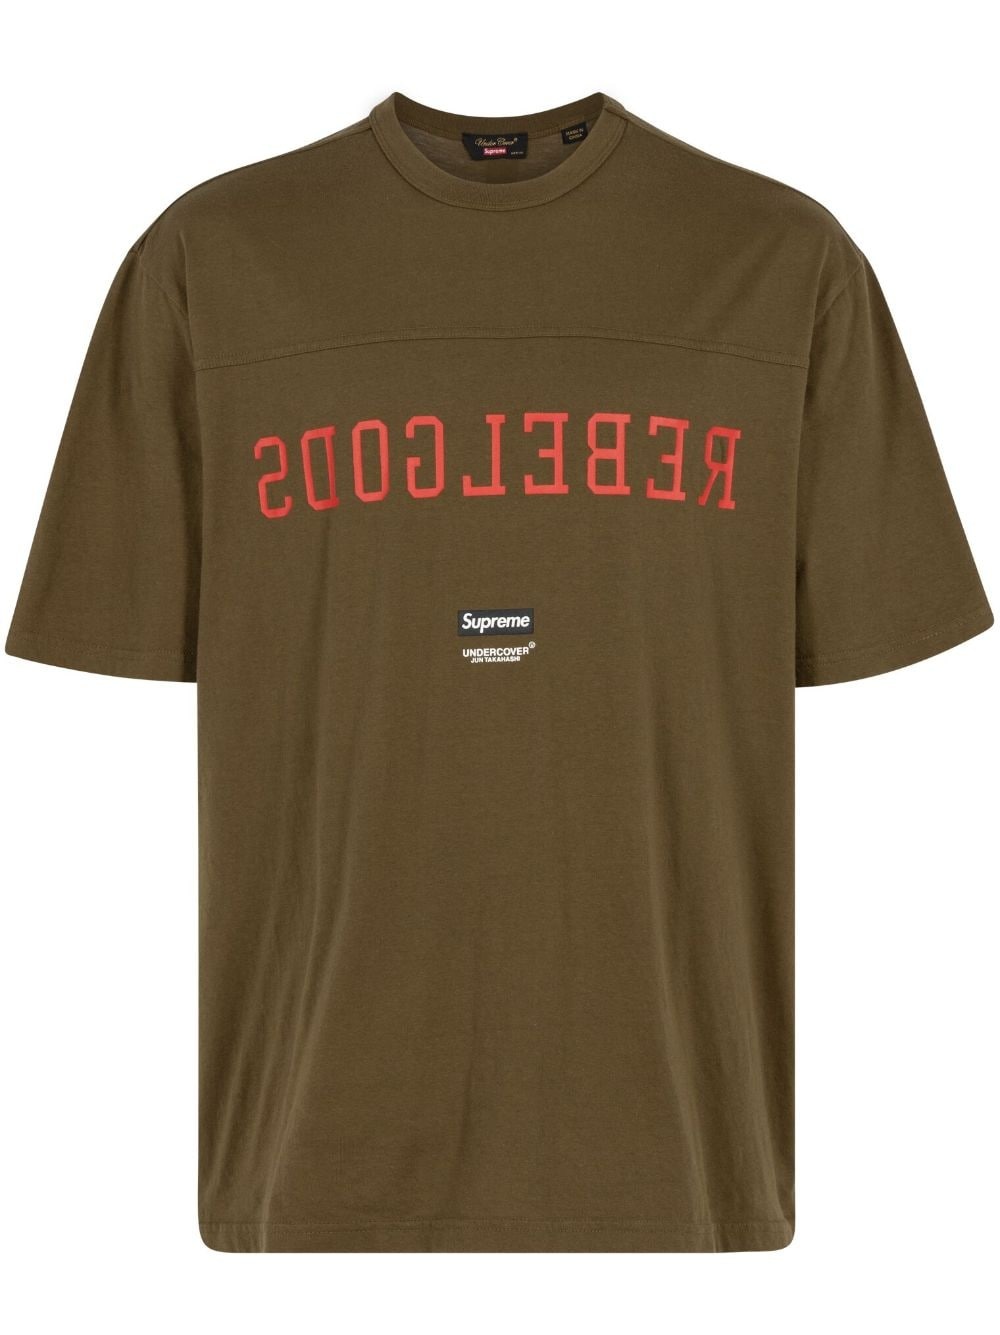 Undercover Football "Olive" T-shirt - 1